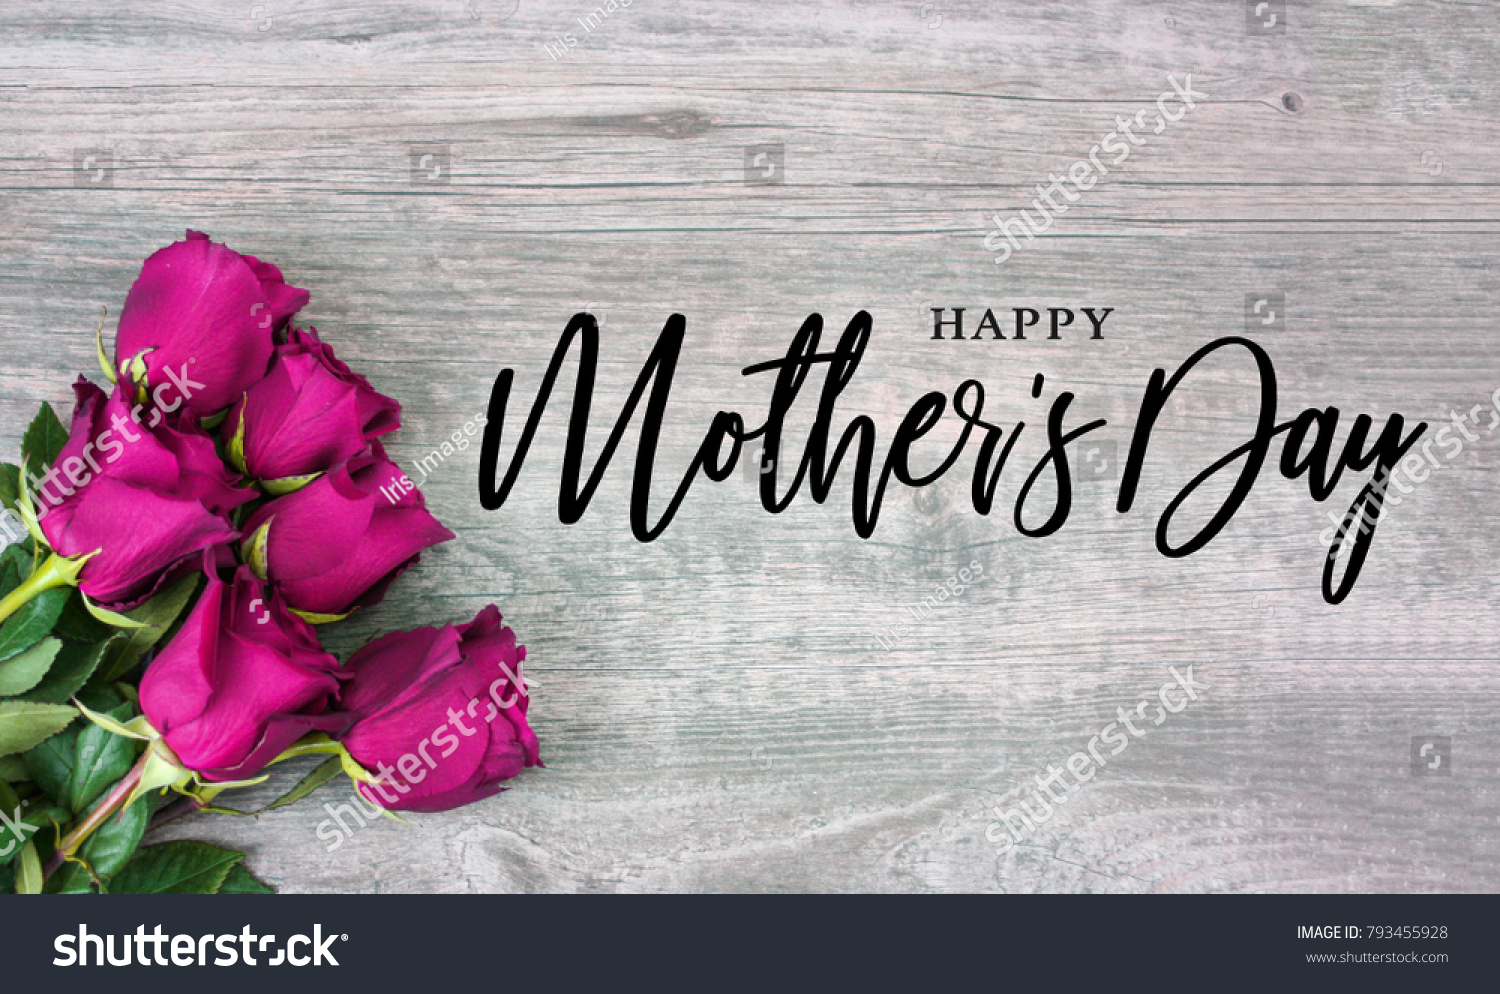 Happy Mother's Day Calligraphy with Pink Roses Over Rustic Wood Background #793455928